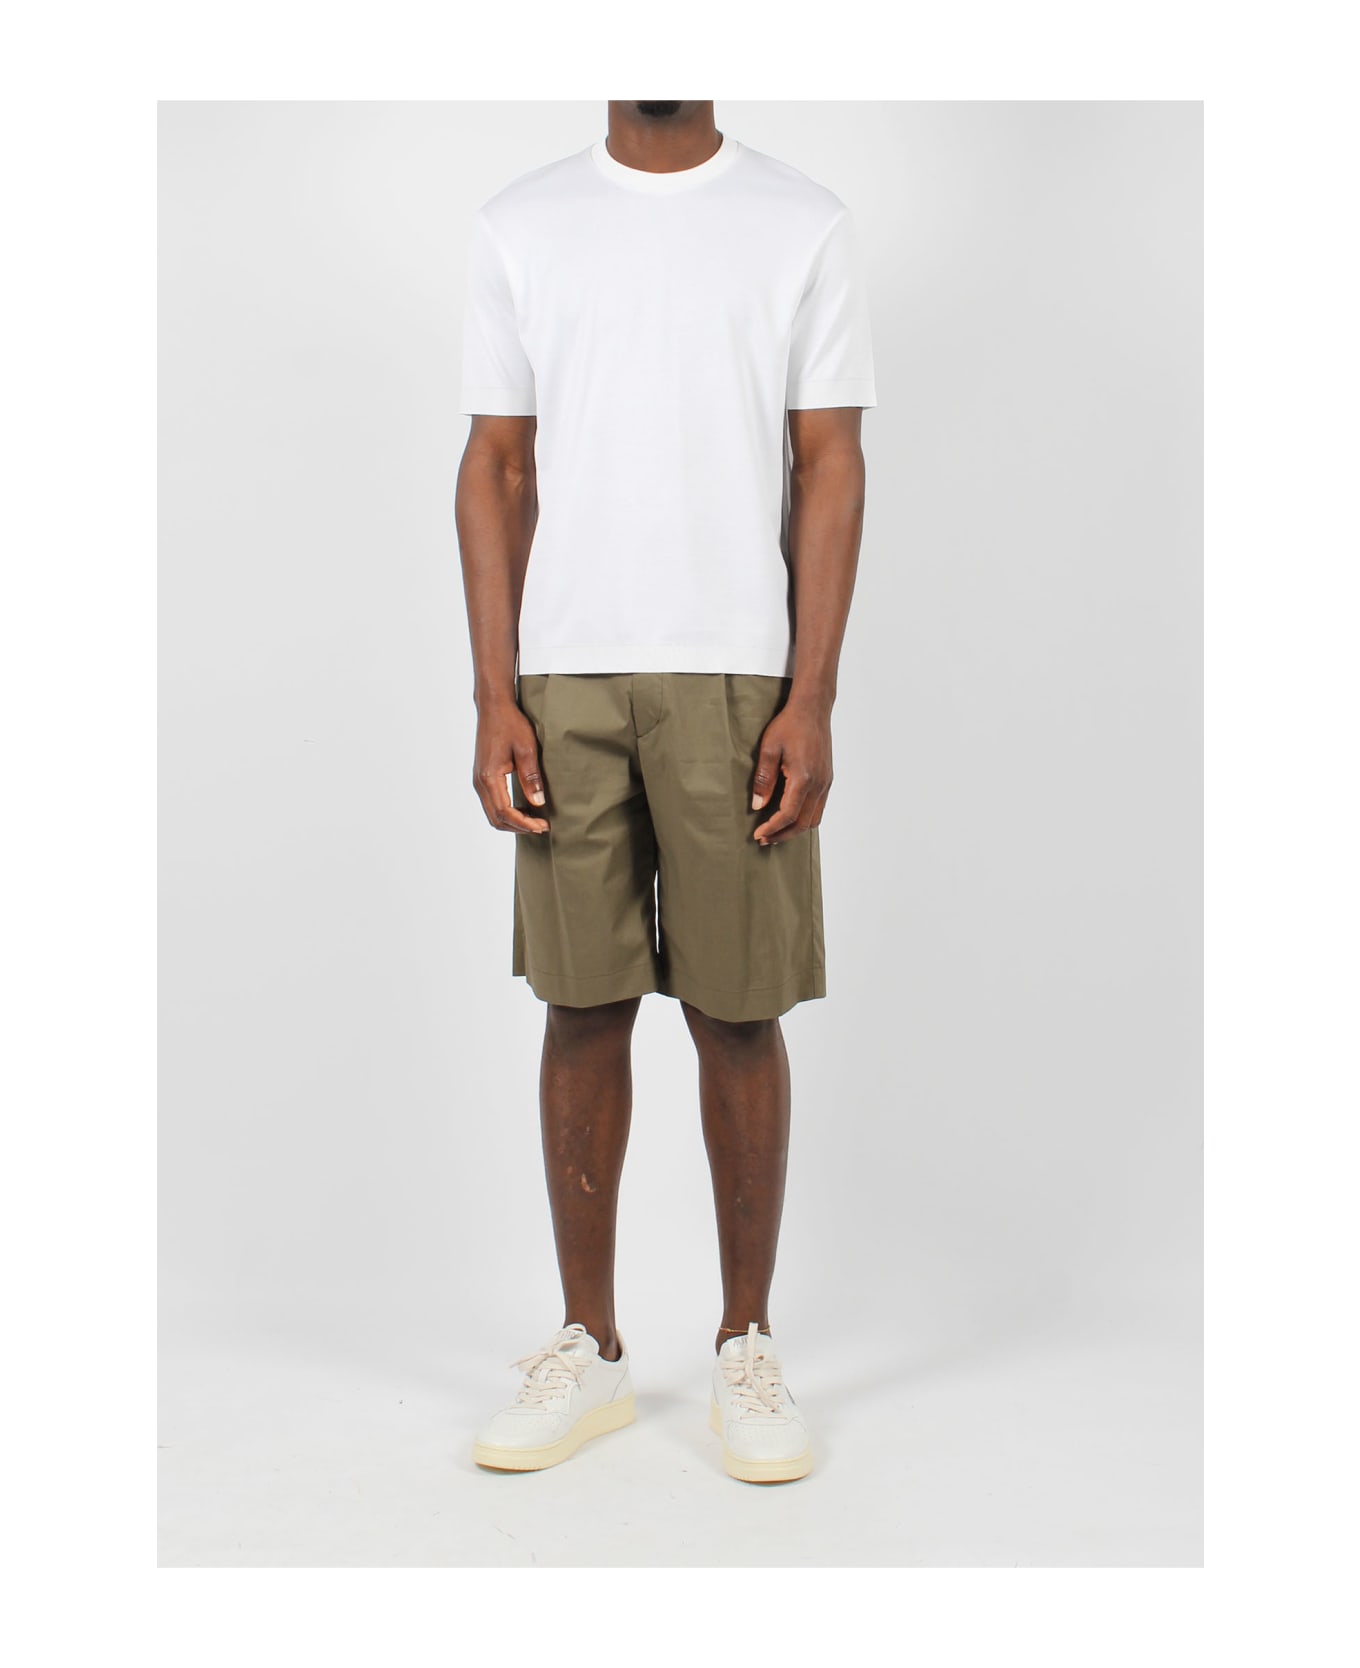 Herno Light Cotton Stretch And Ultralight Crease Shorts - Green